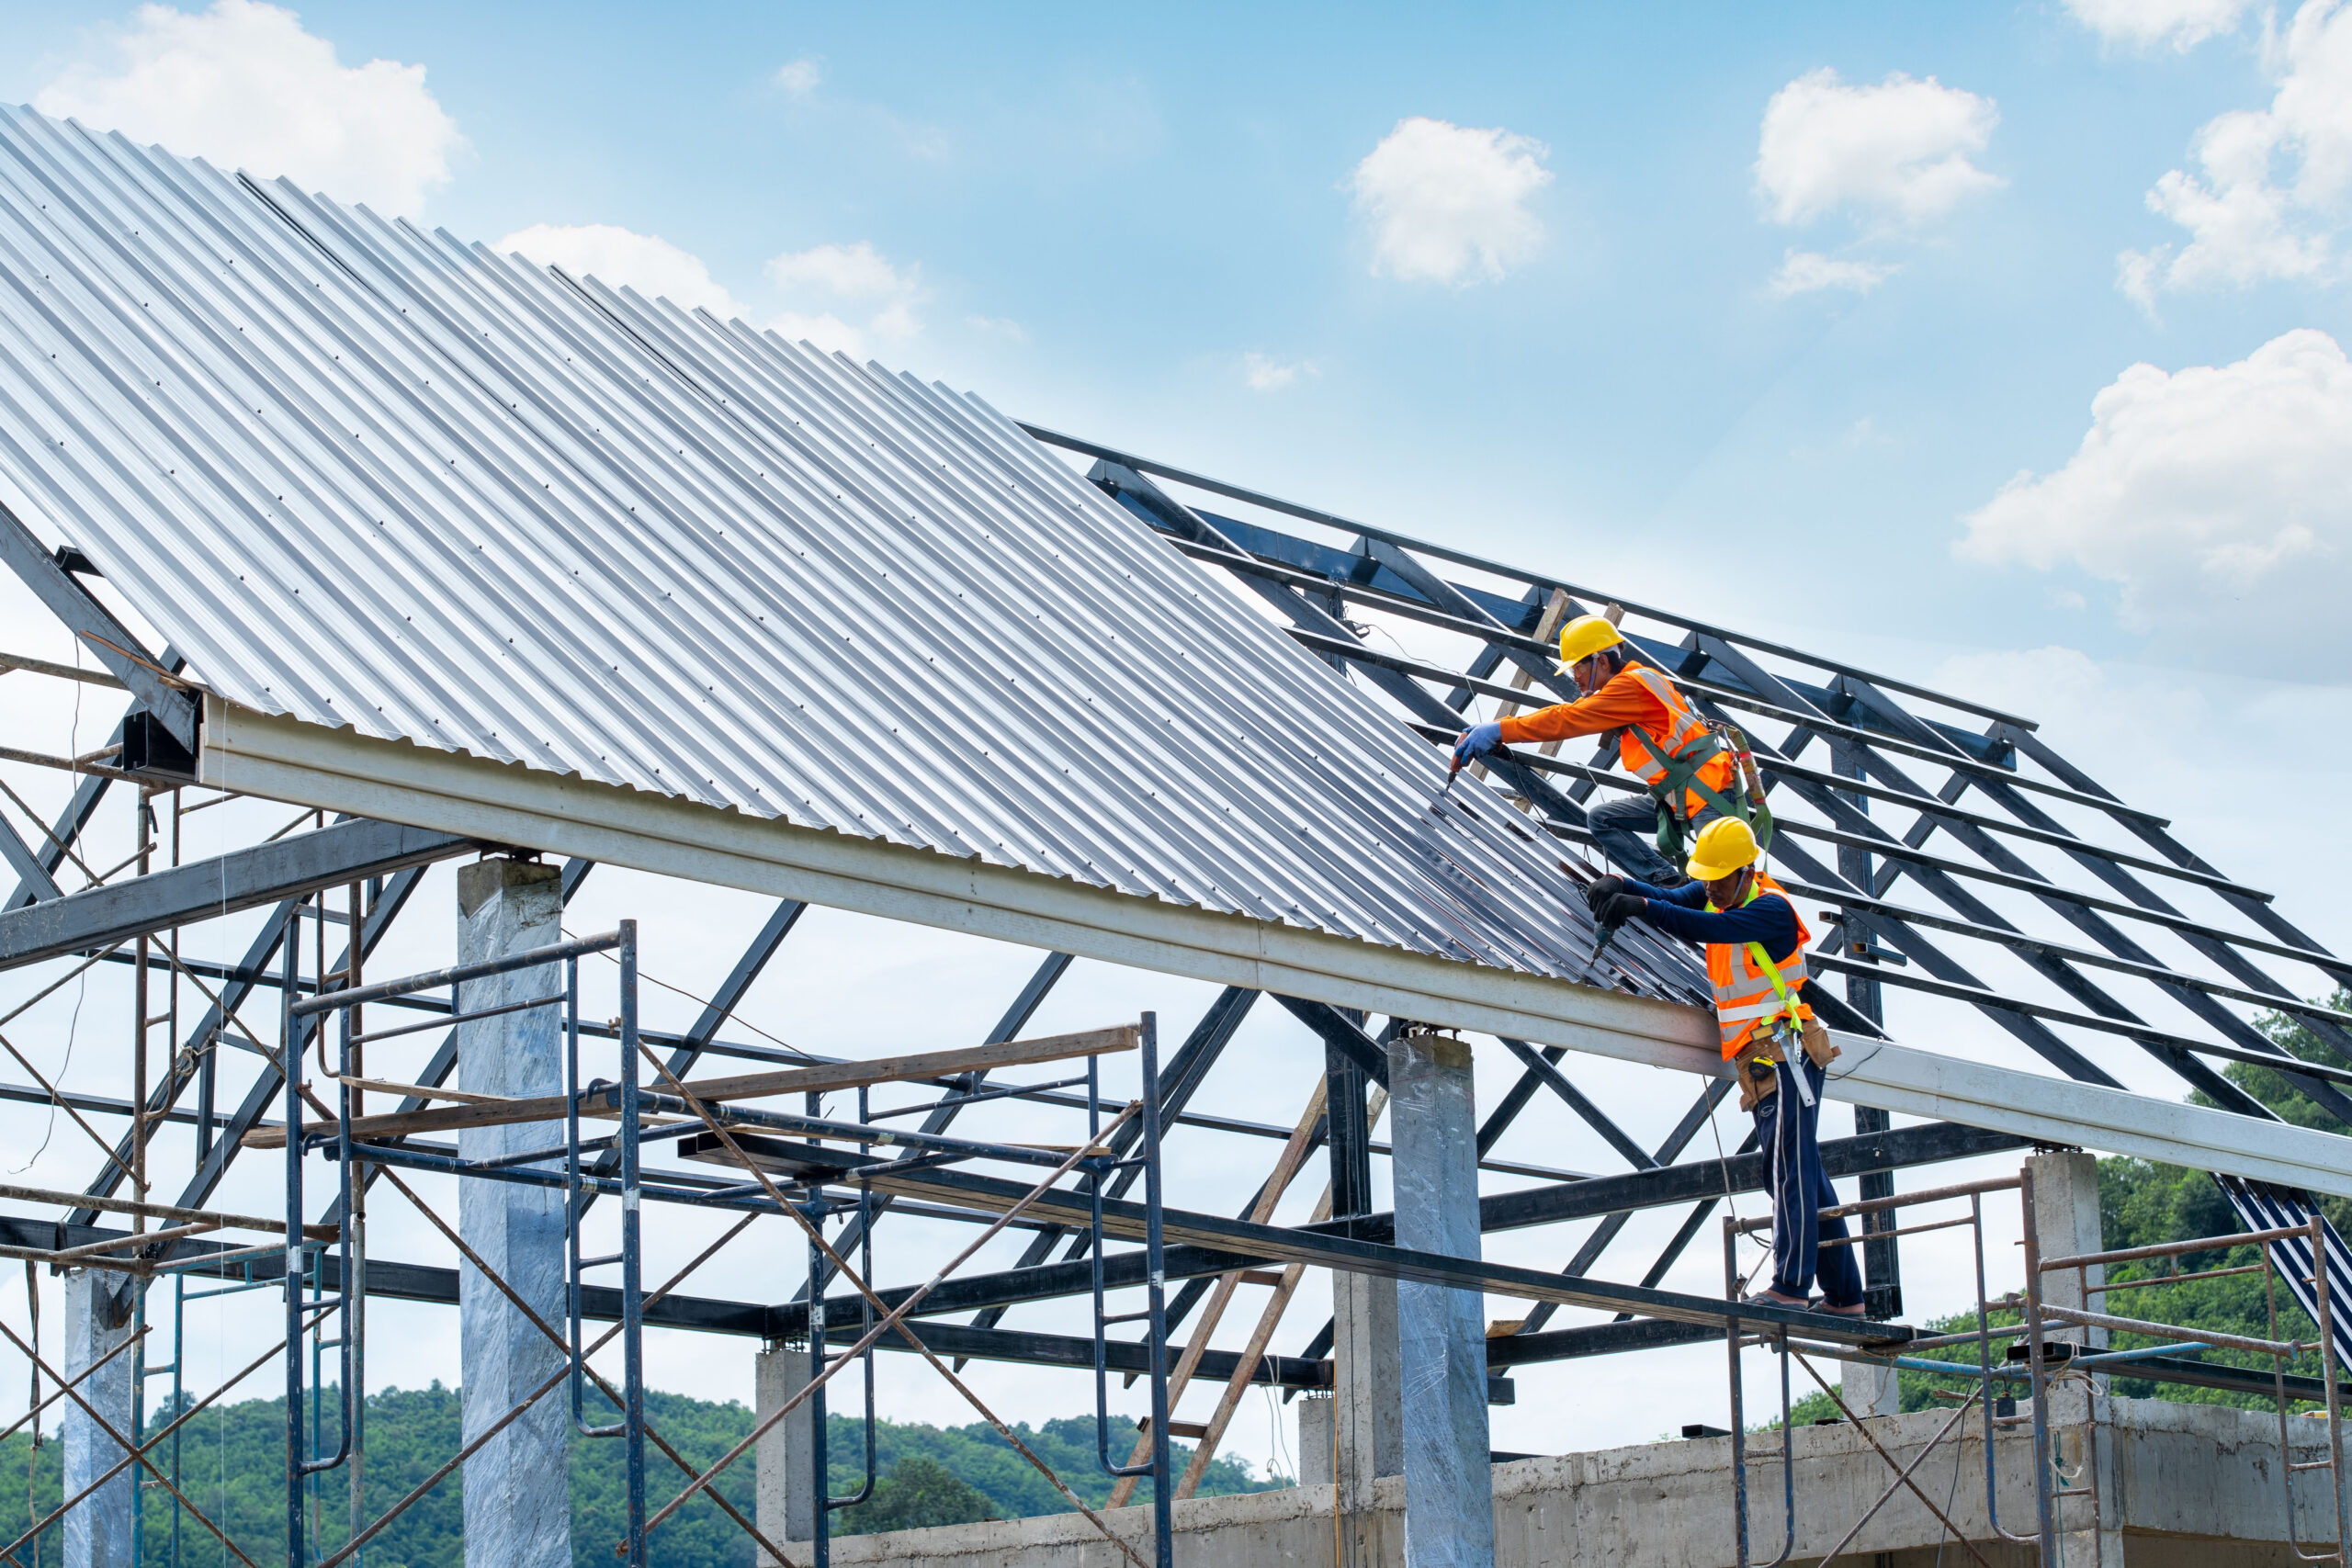 United States Roofing Market Set to Reach Valuation of .64 Billion by 2031